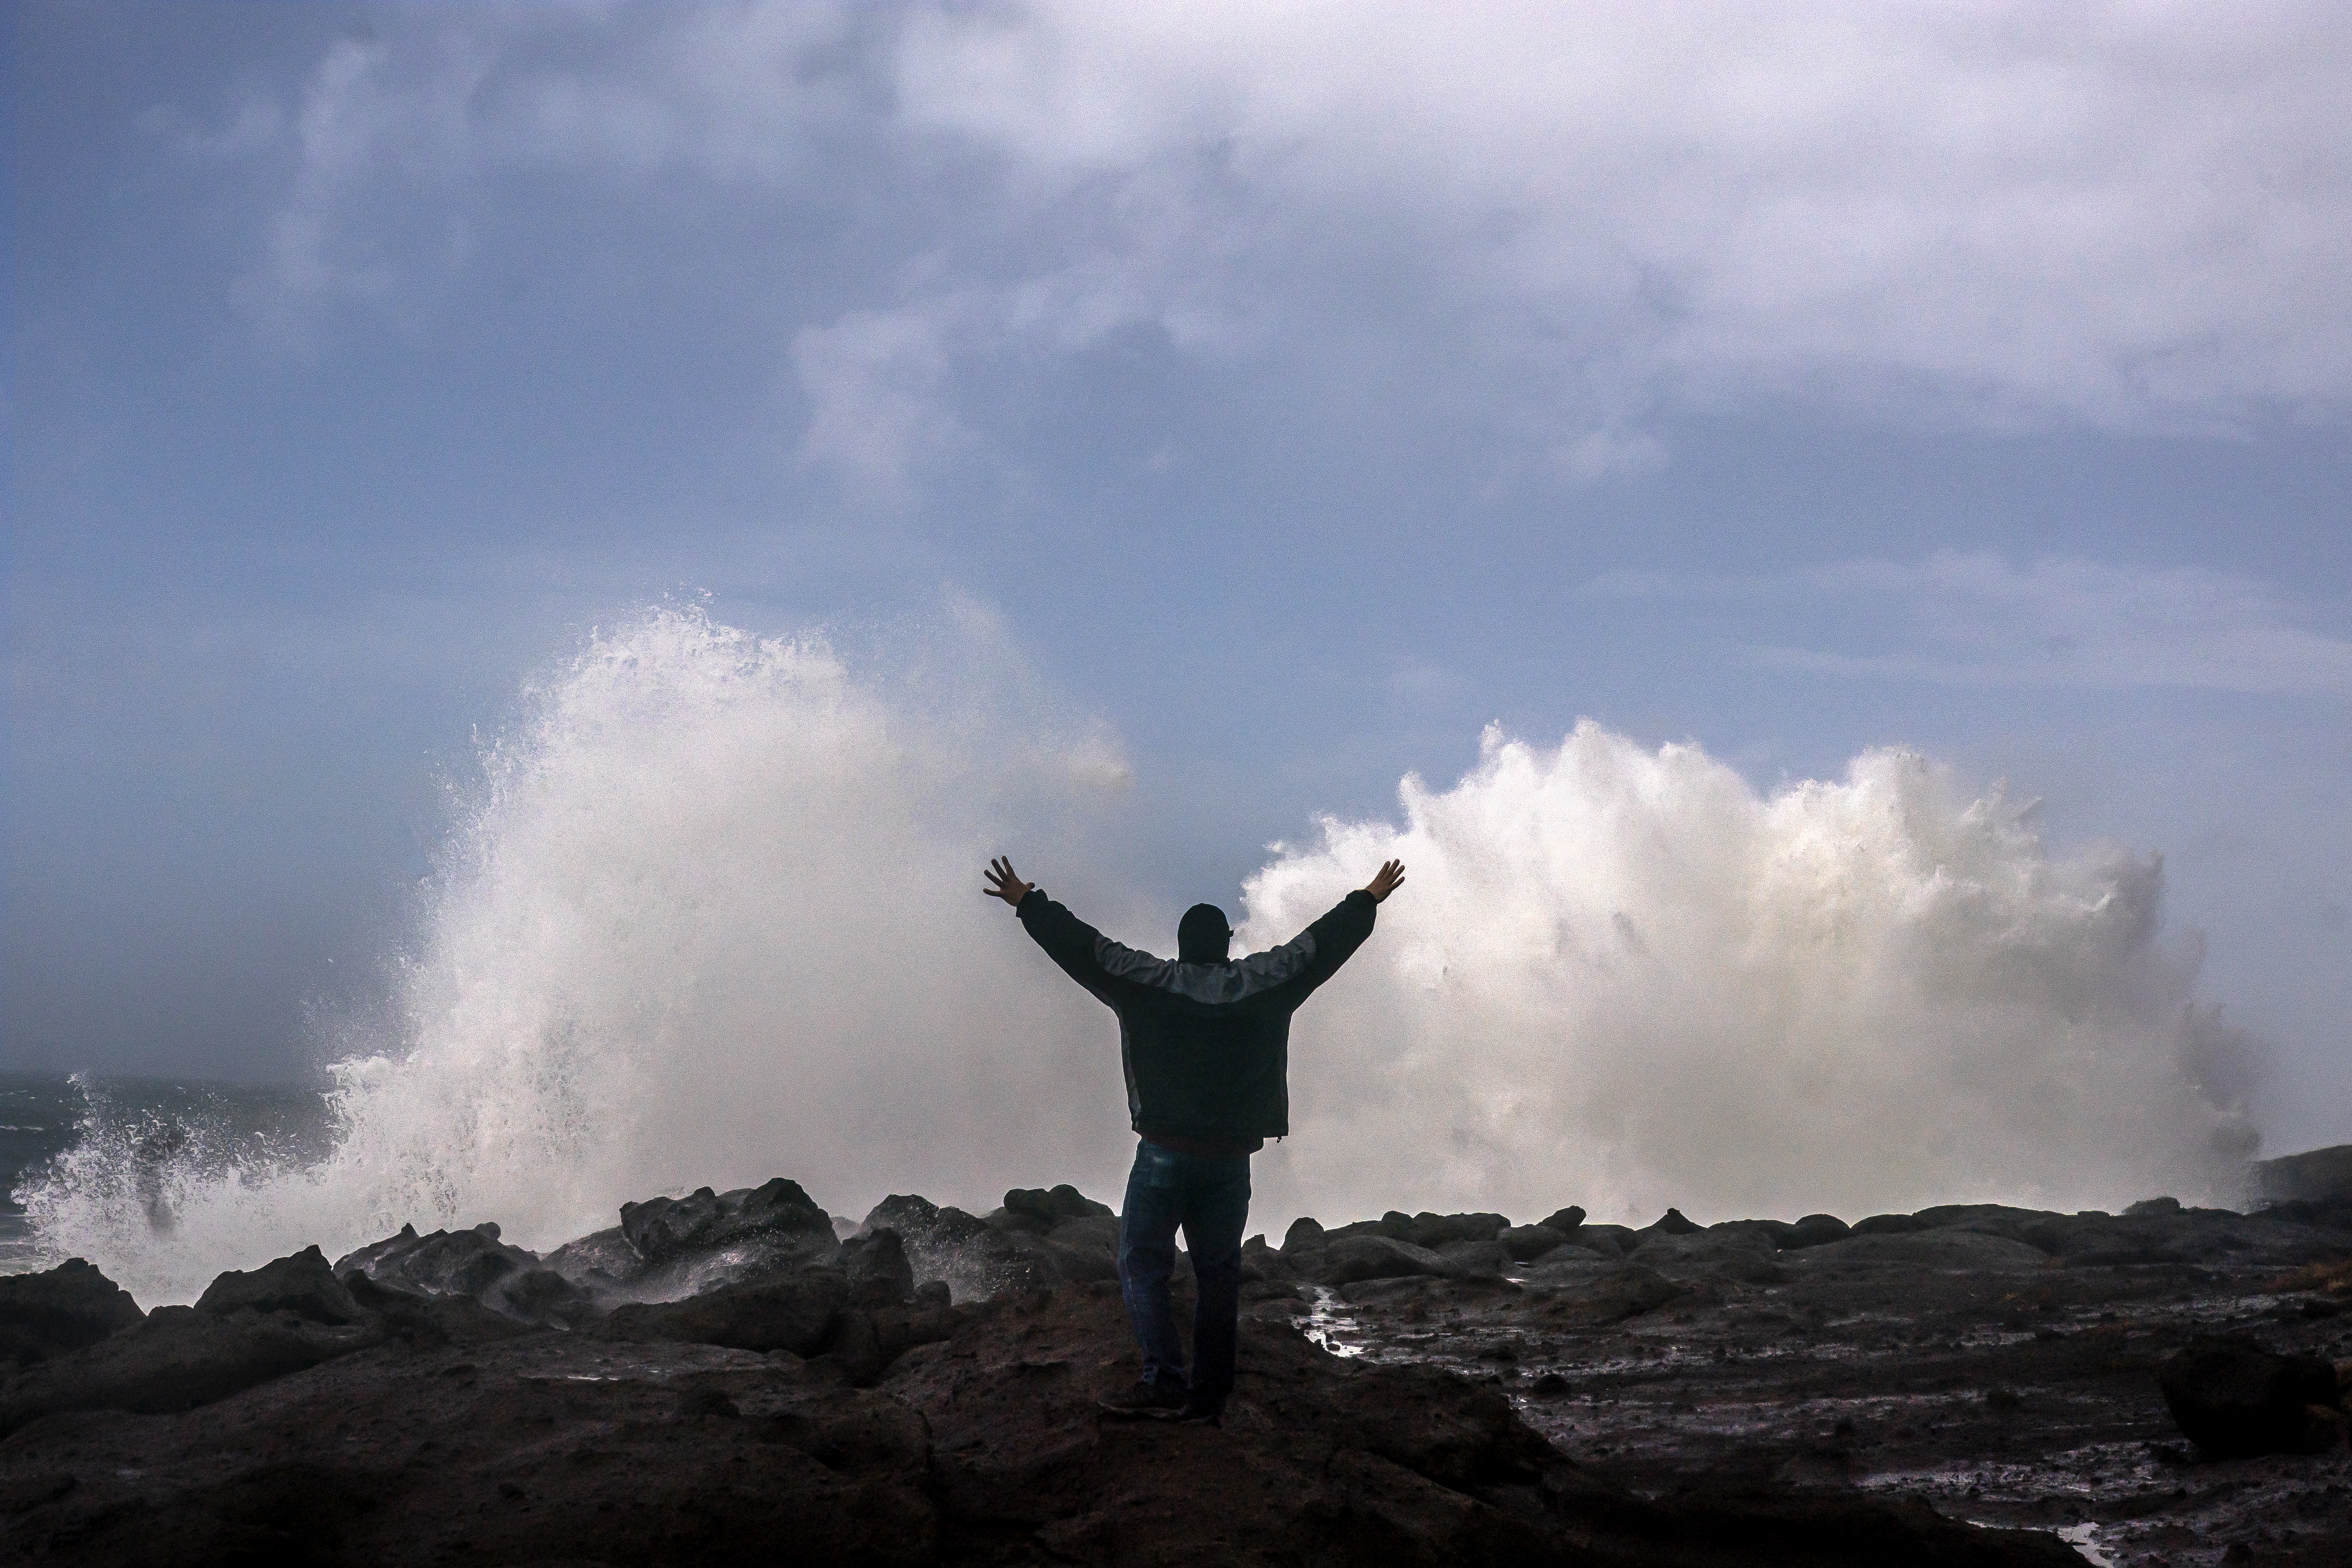 A man reacts as large waves caused by a bomb cyclone storm system break against the Oregon coast in Depoe Bay.